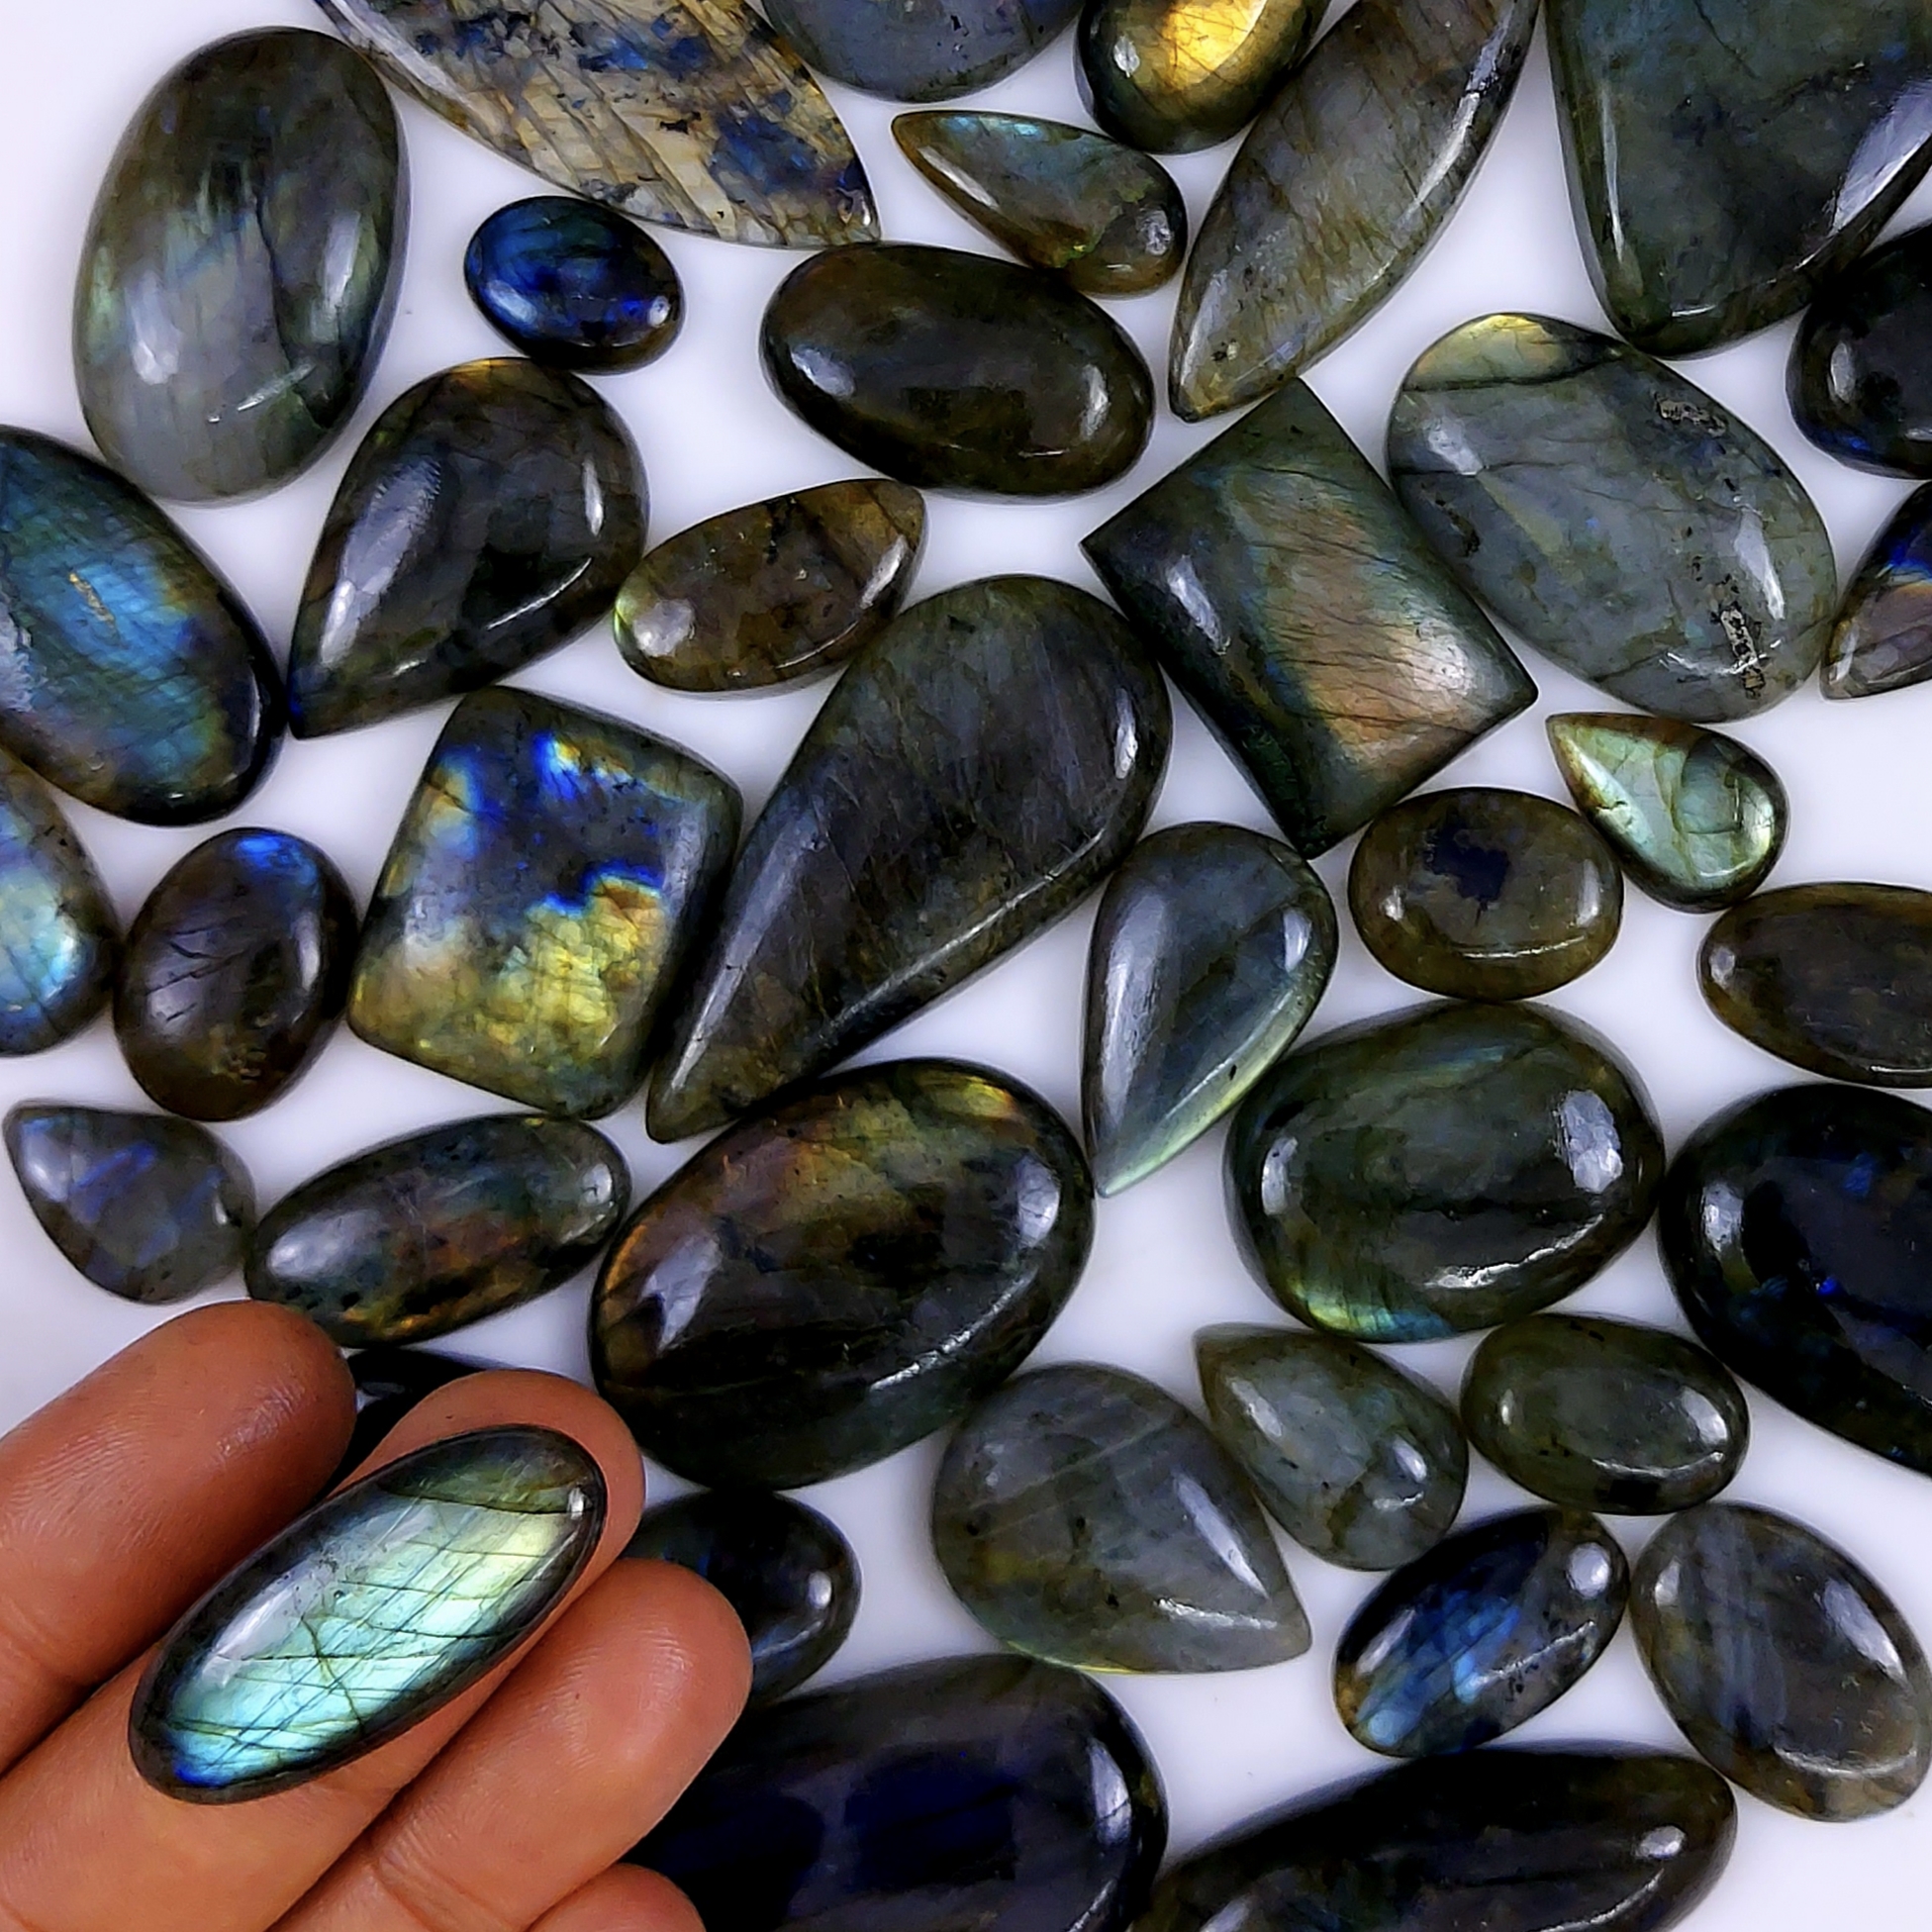 44pc 1699Cts Labradorite Cabochon Multifire Healing Crystal For Jewelry Supplies, Labradorite Necklace Handmade Wire Wrapped Gemstone Pendant 55x26 18x14mm#6284